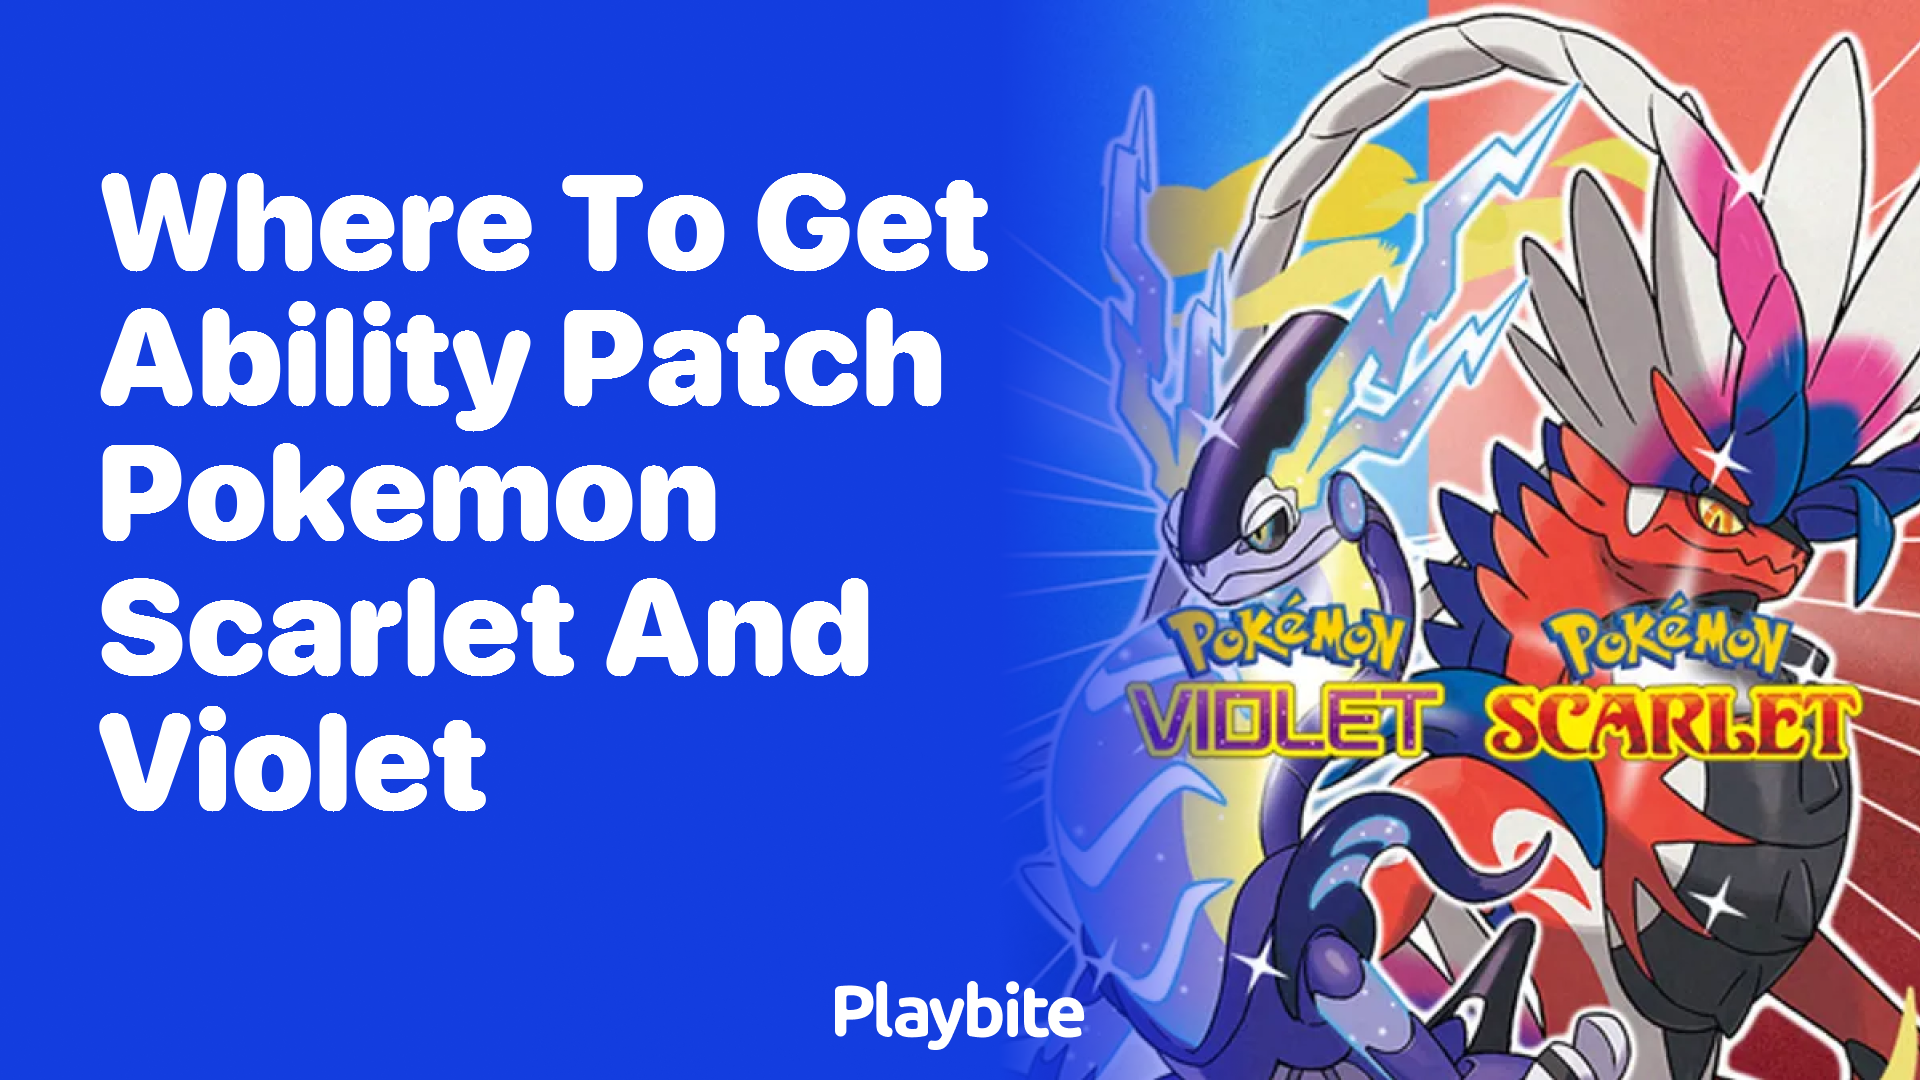 Where to Get Ability Patch in Pokemon Scarlet and Violet